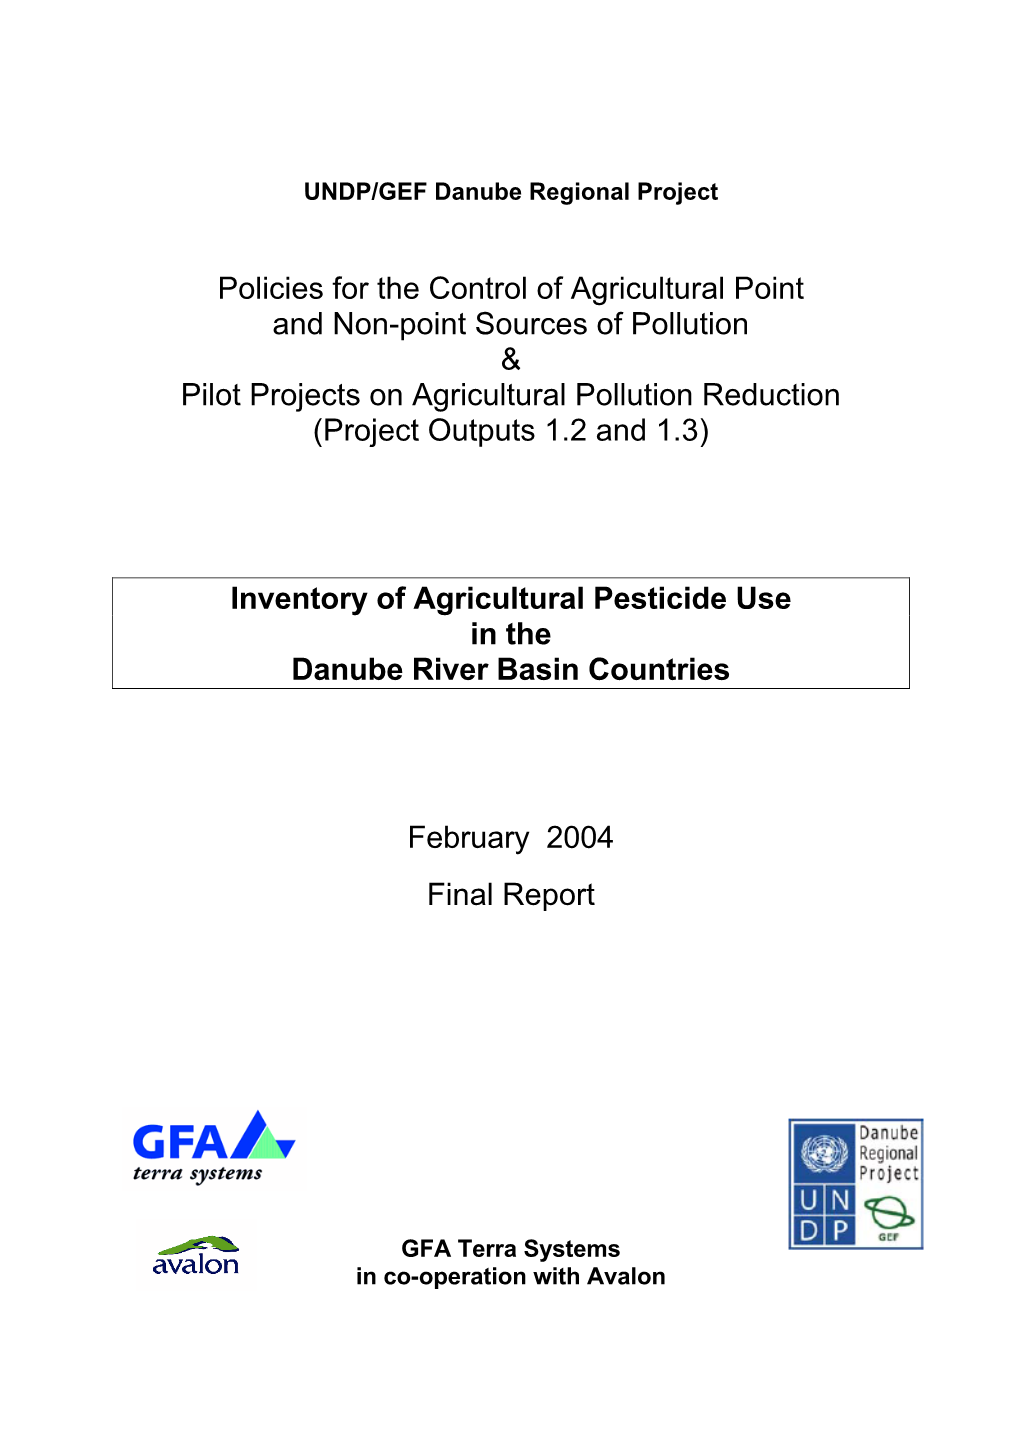 Inventory of Agricultural Pesticide Use in the Danube River Basin Countries